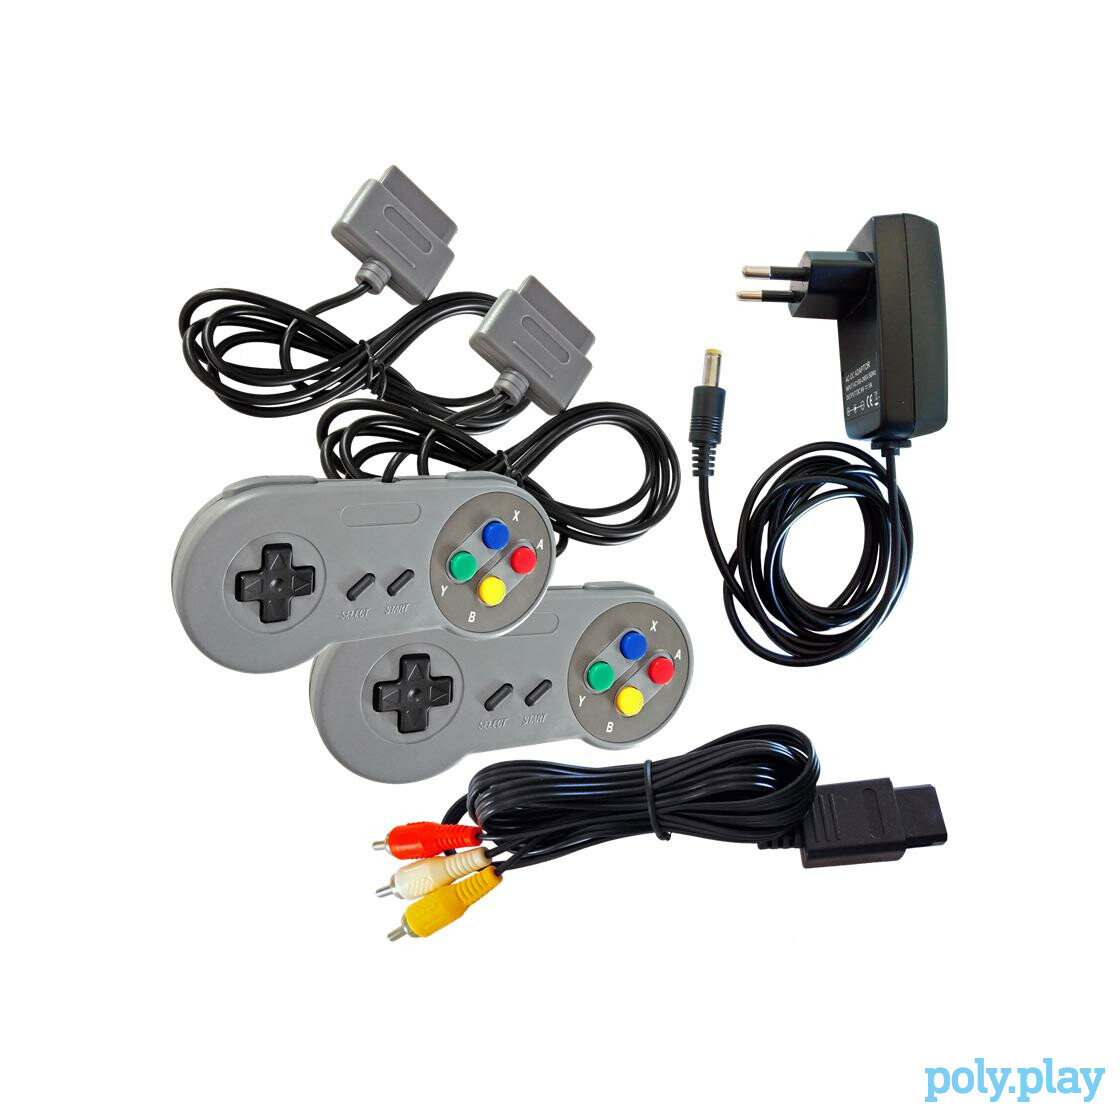 Power Supply + AV Cable + 2 Controllers - SNES (Set)